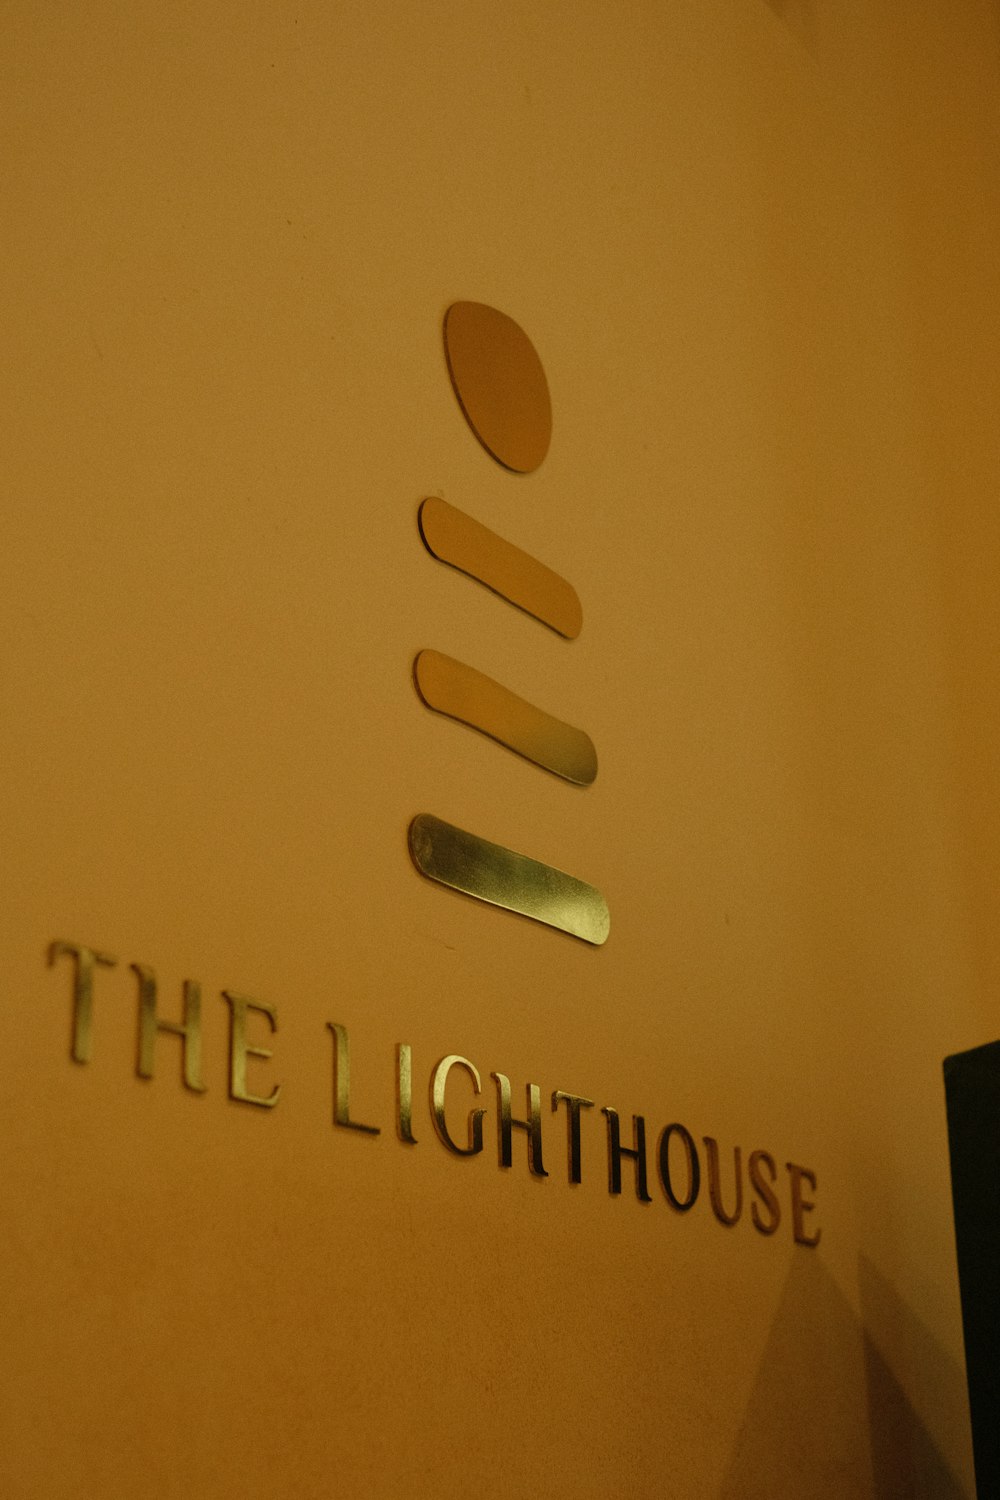 the sign for the lighthouse on the wall